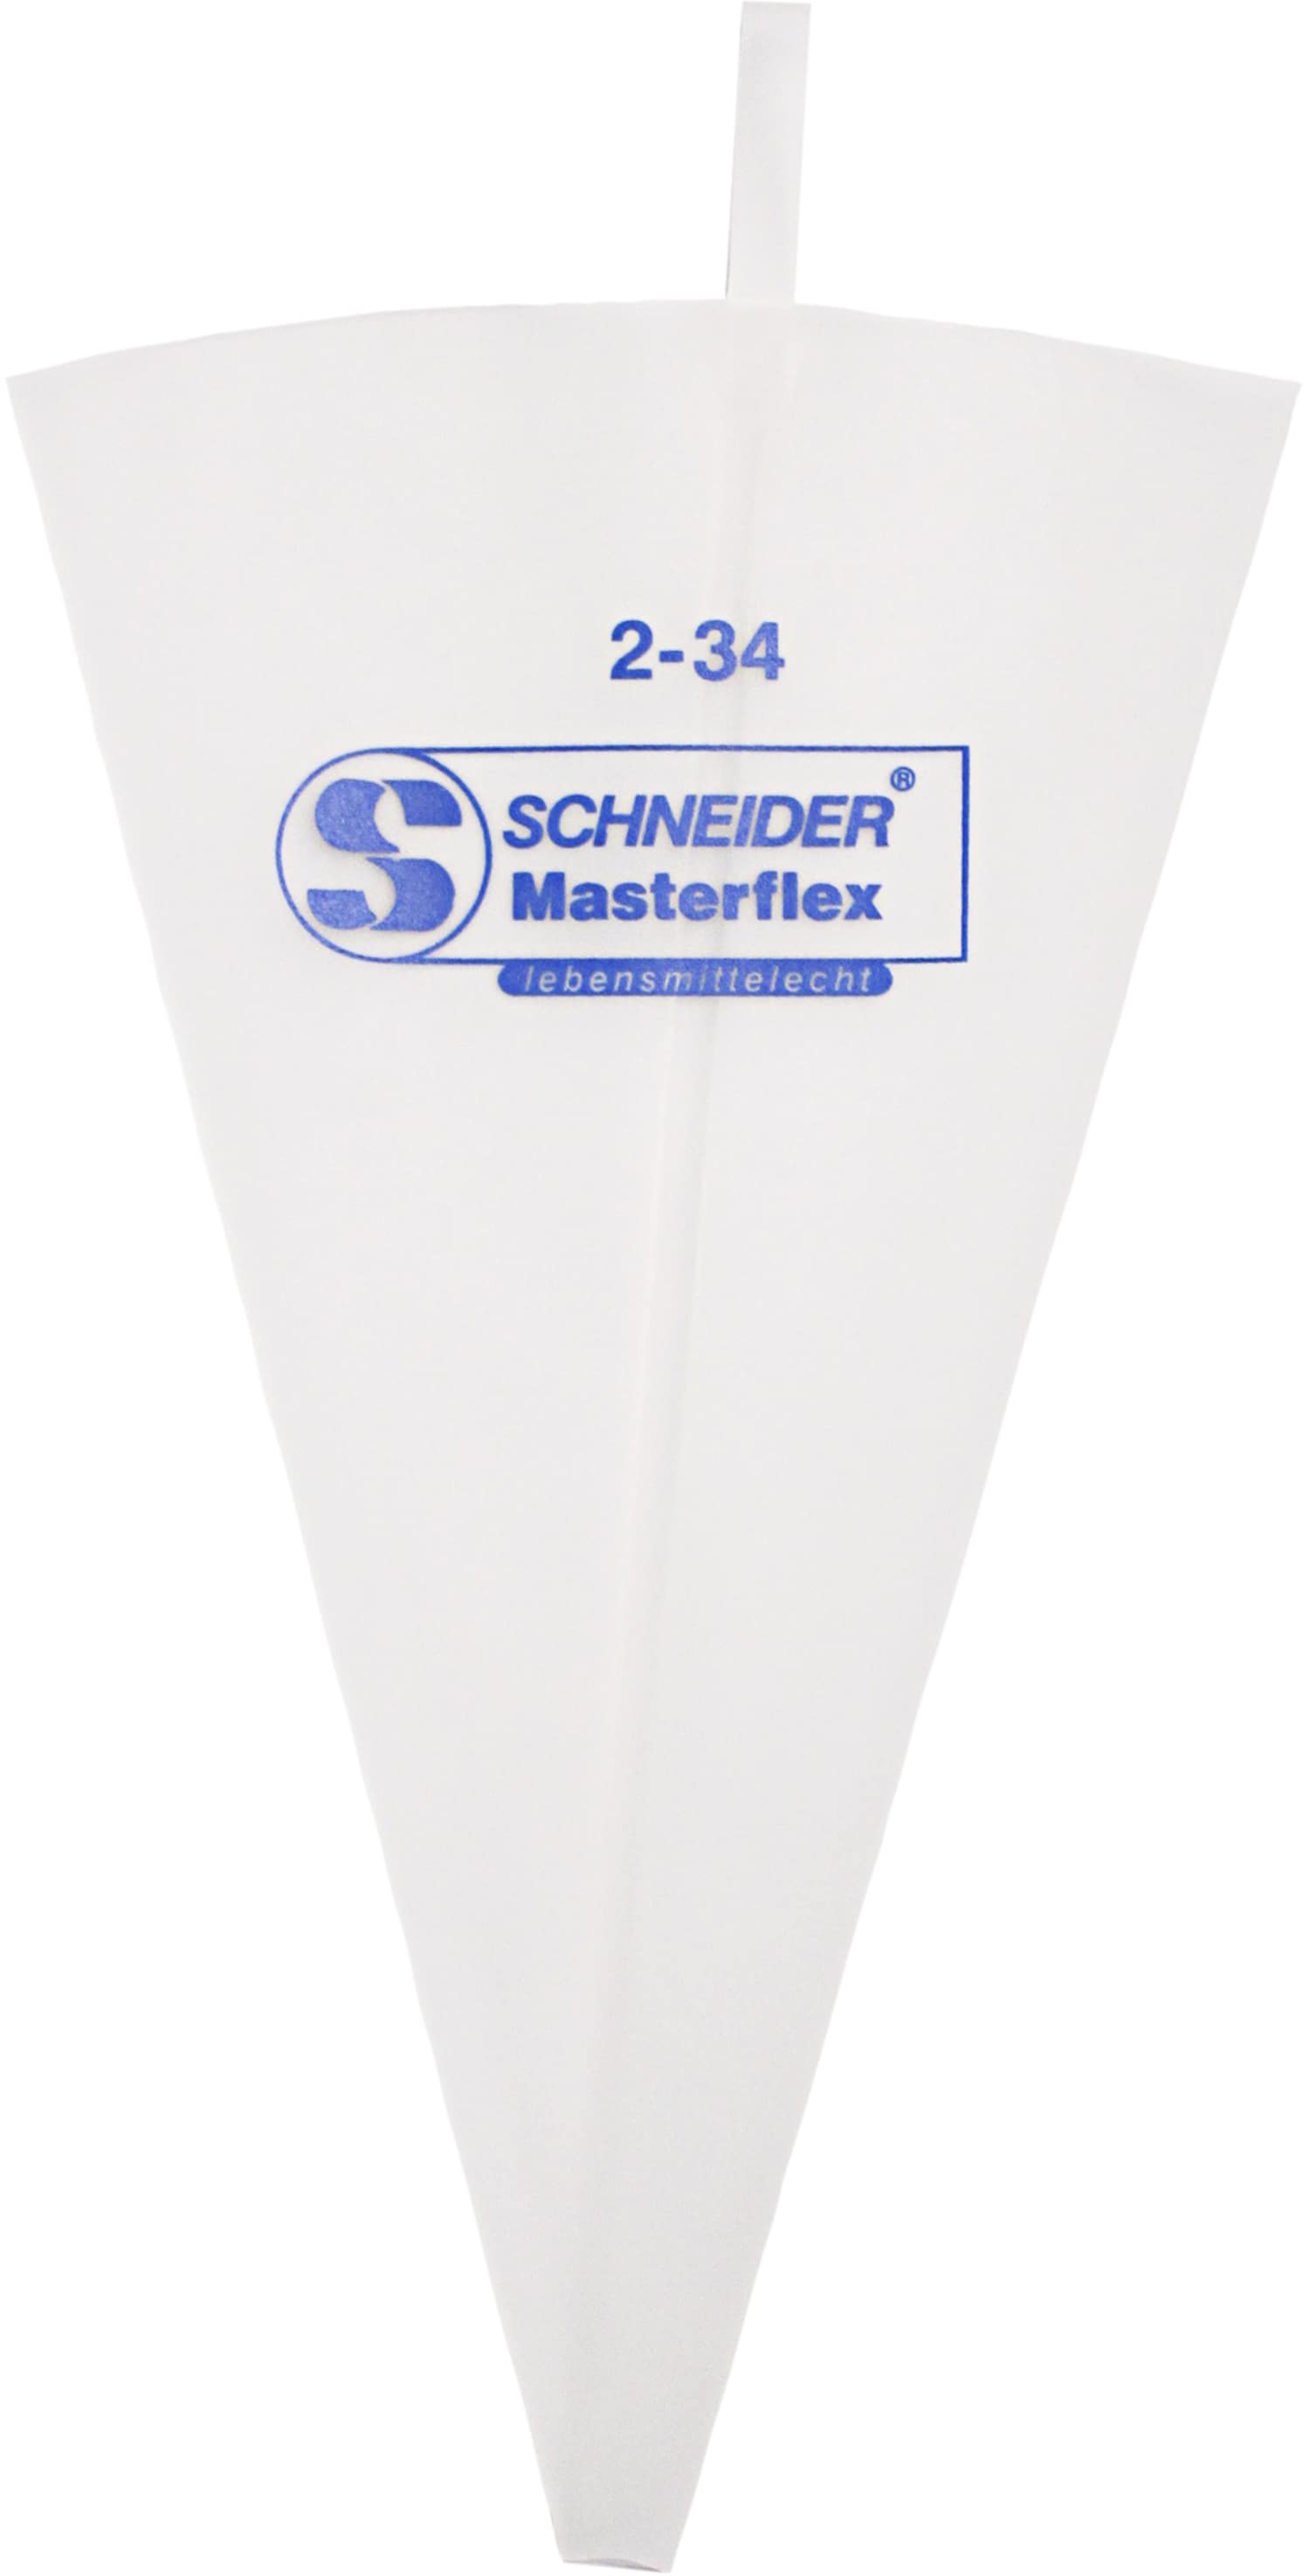 Pastry bags "MASTERFLEX" 330002